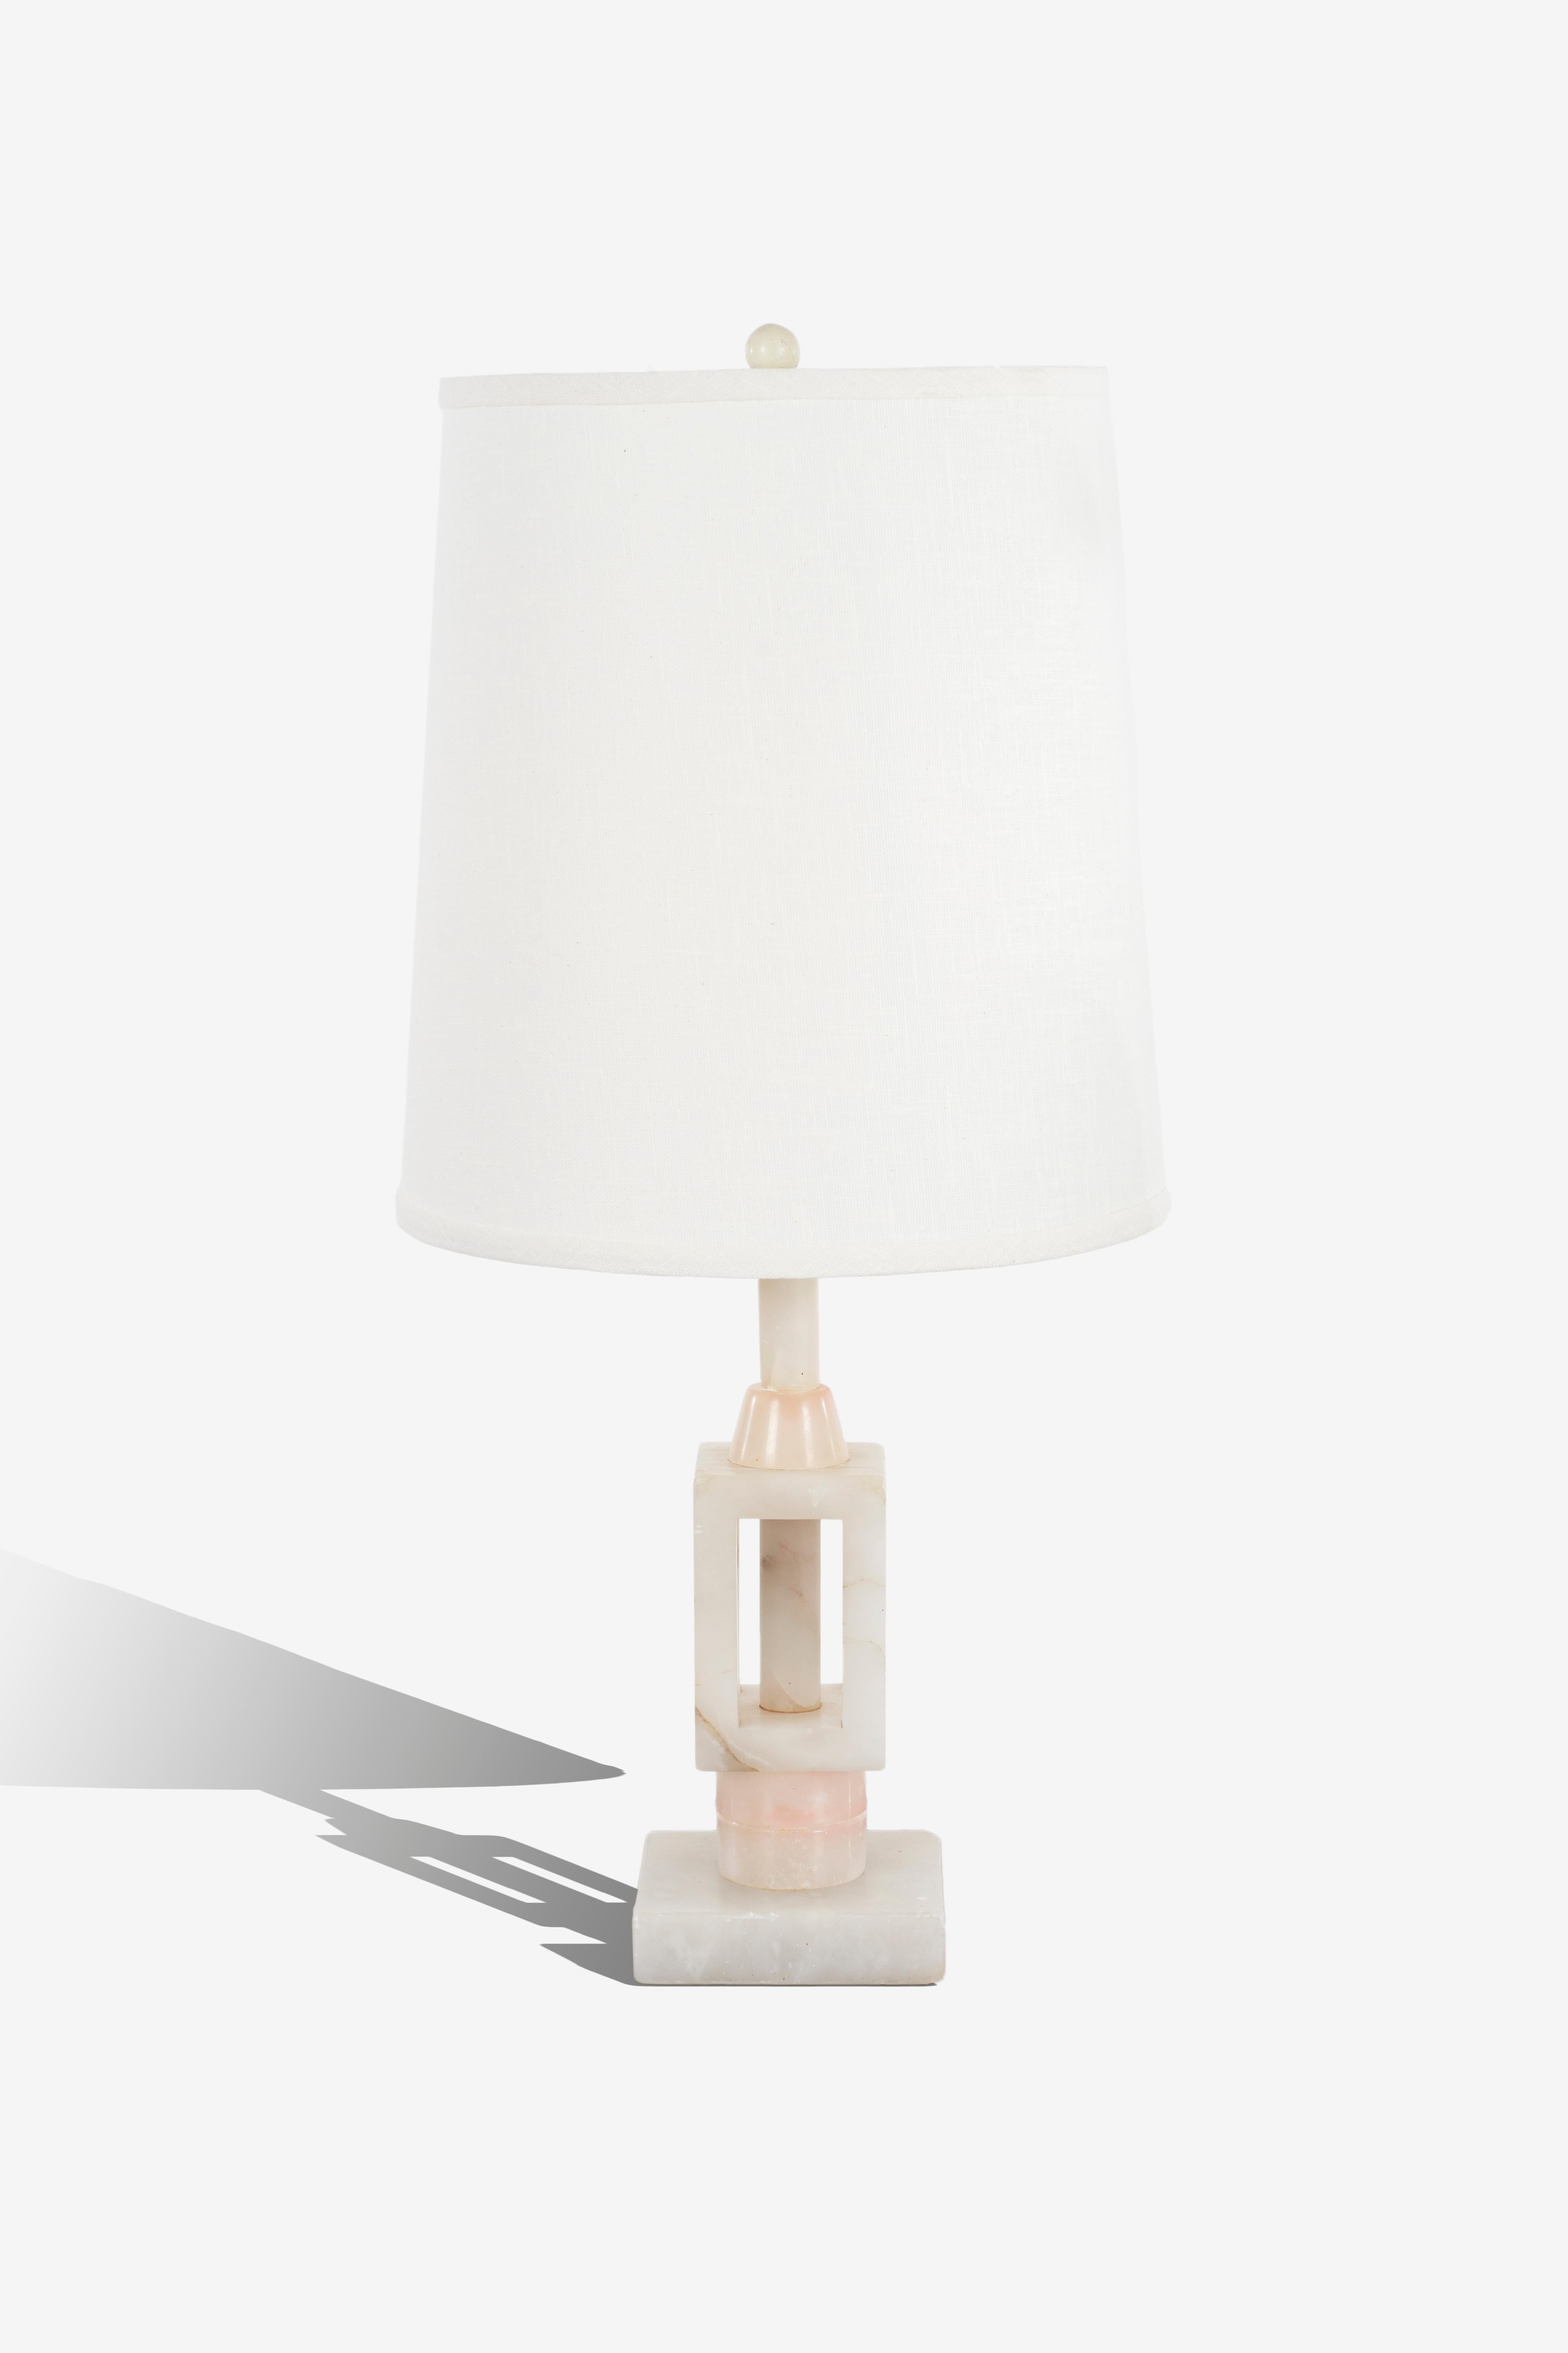 Arturo Pani style, onyx marble table lamp, white onyx with pink highlights.


Measures: Lamp shade diameter 12